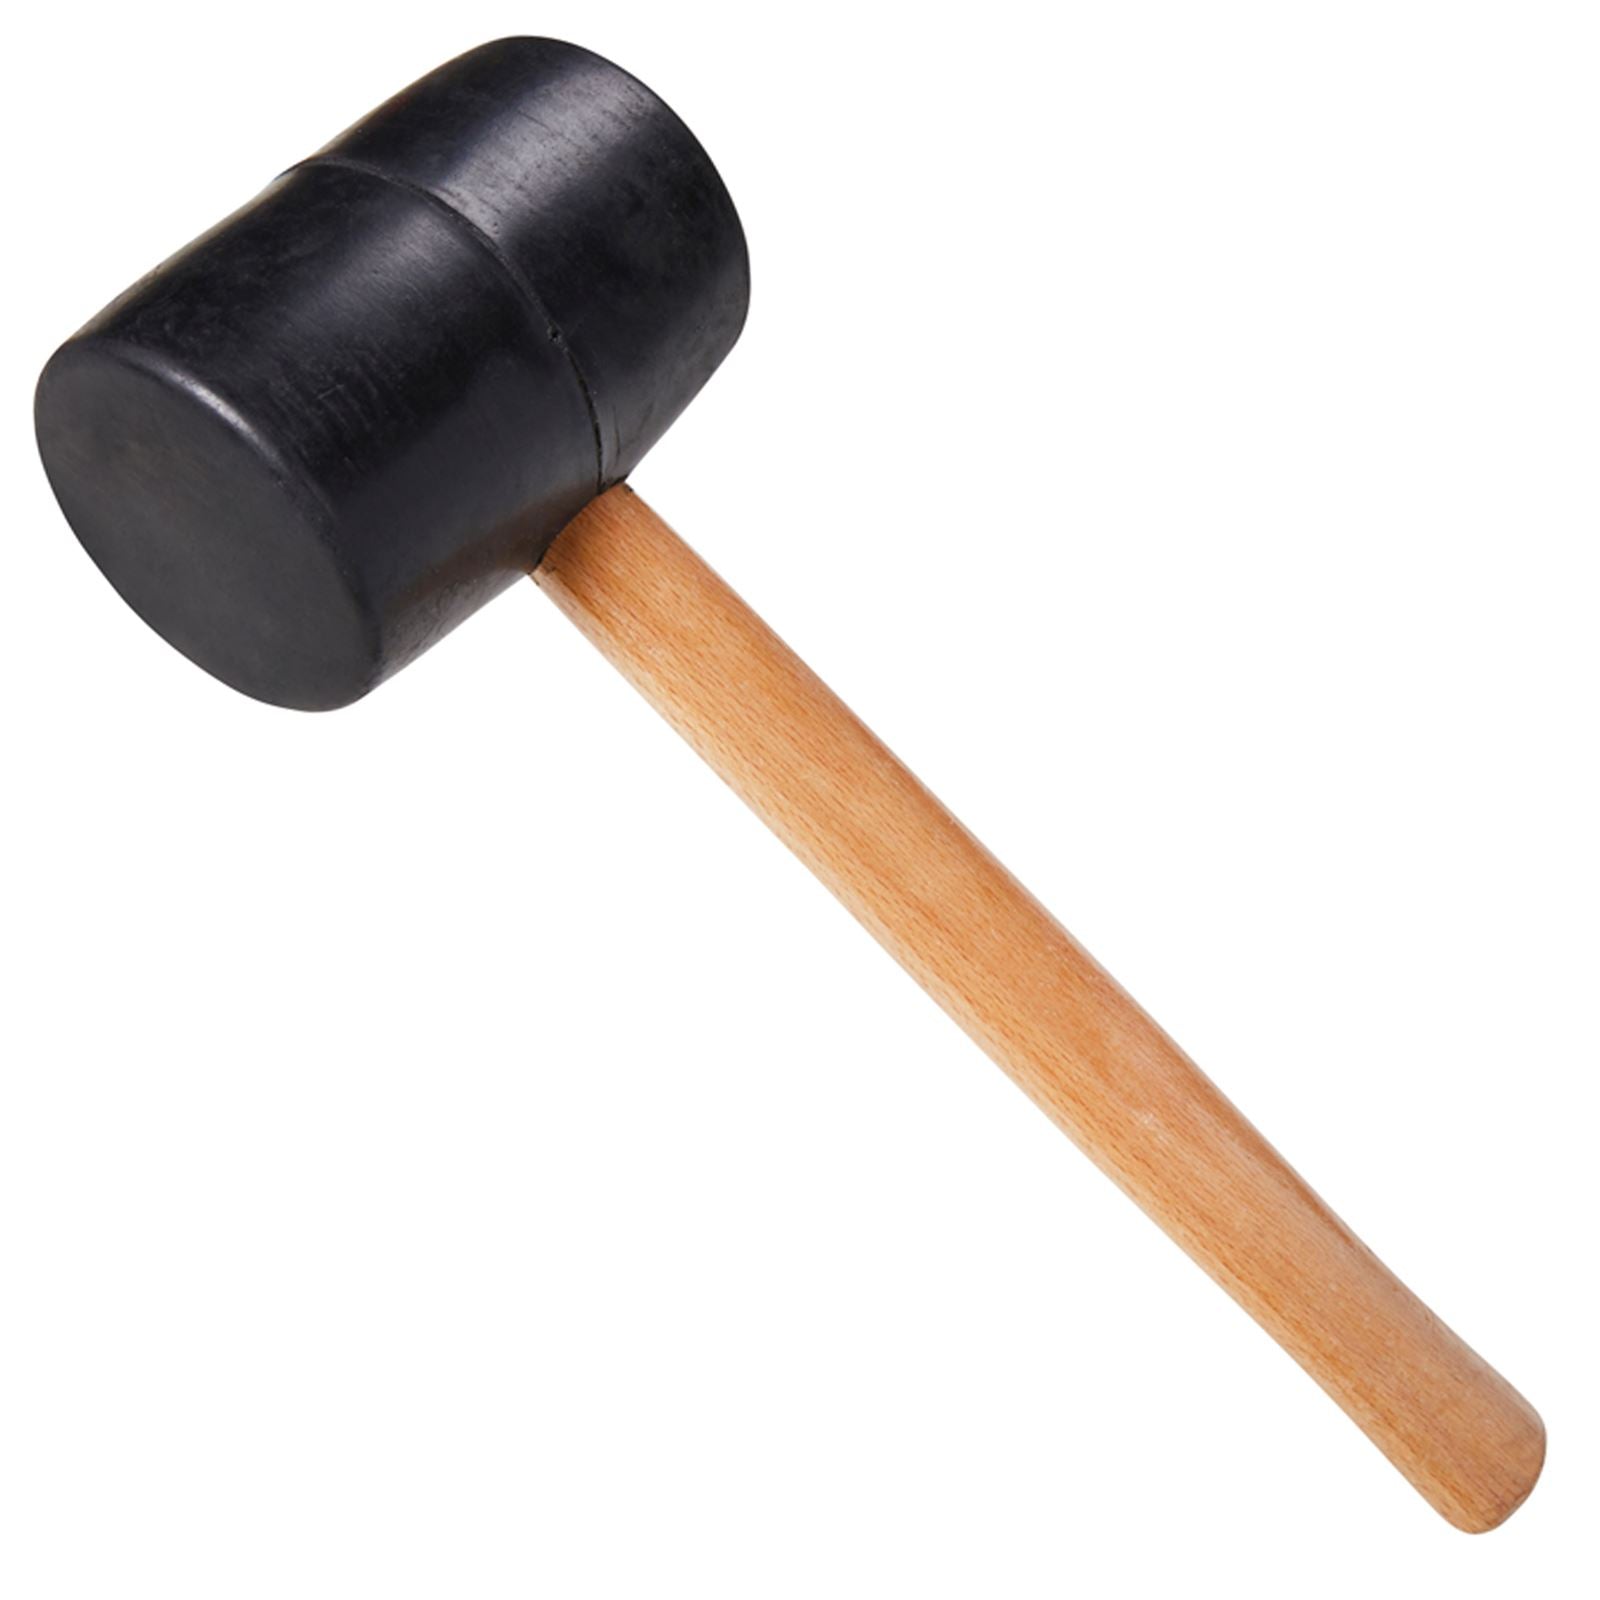 BlueSpot Black Rubber Mallet With Wooden Handle 32oz